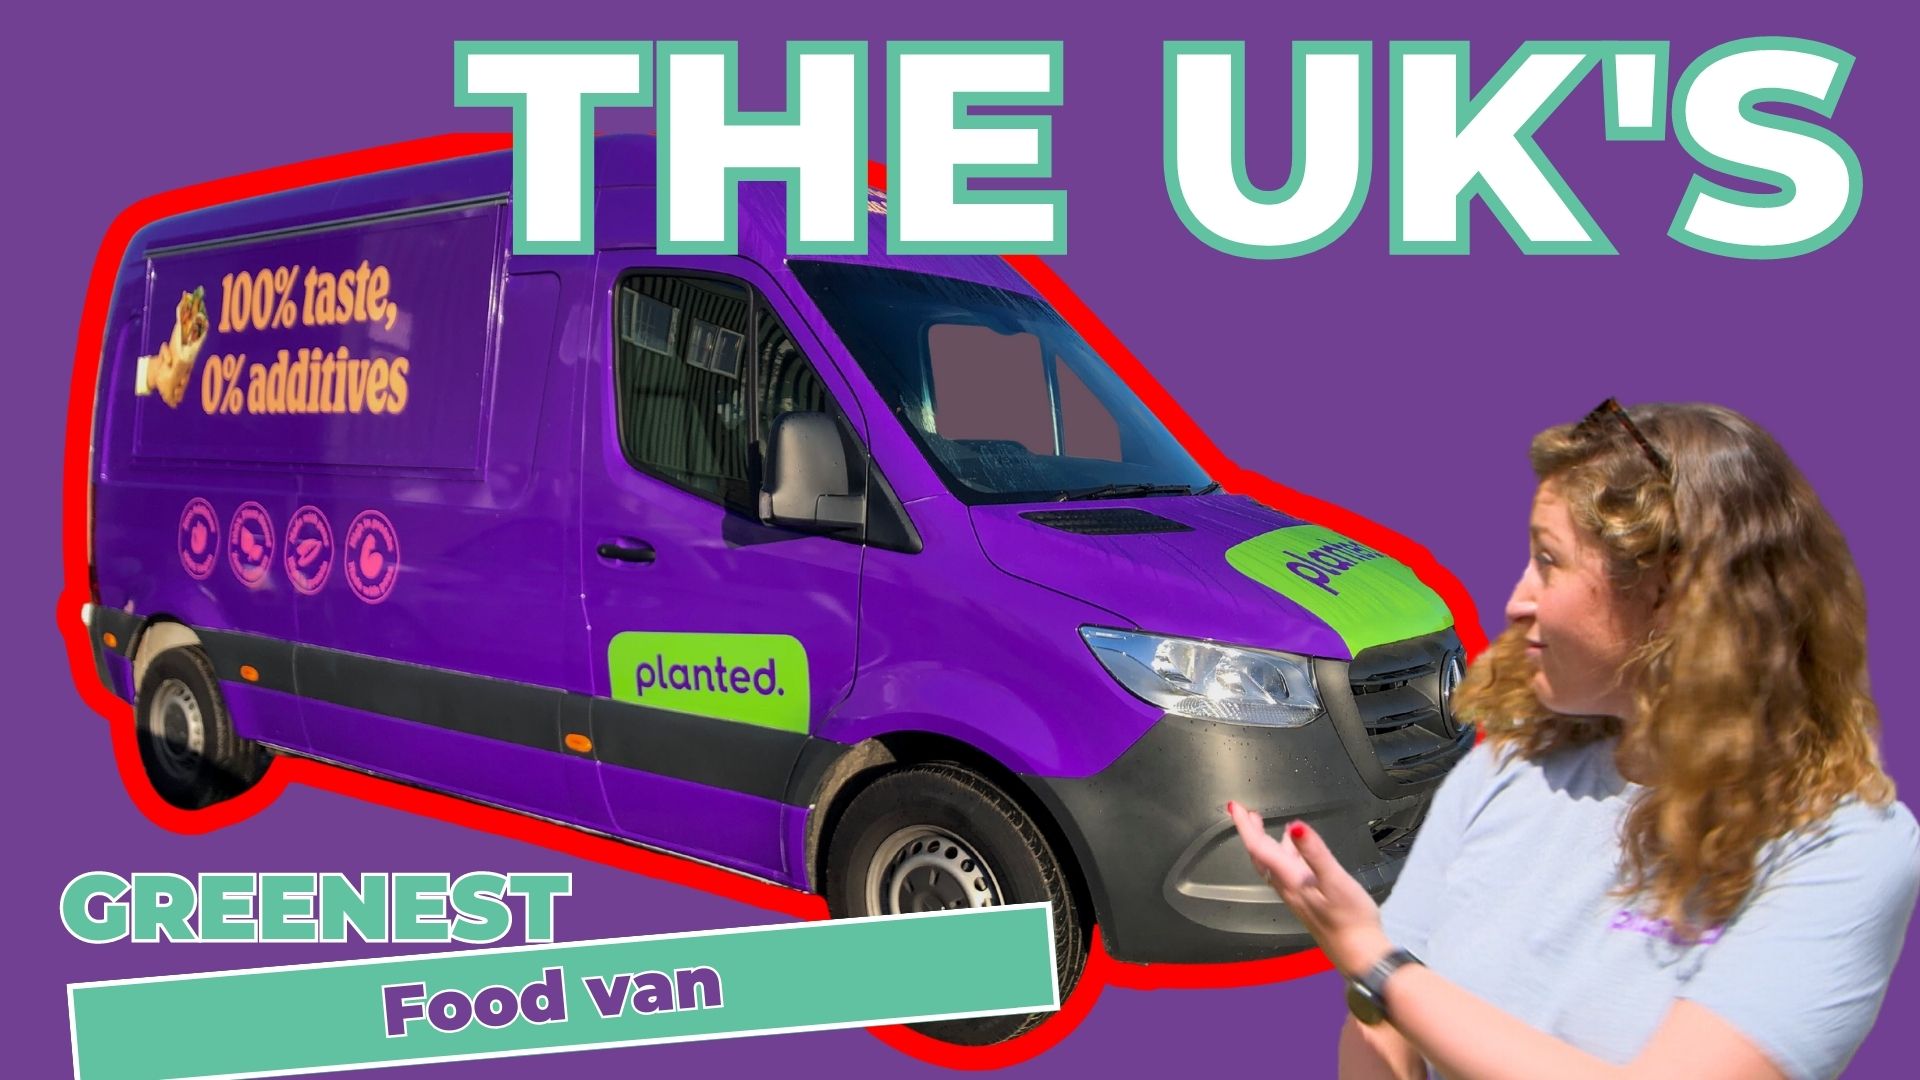 Promohire create the UKs greenest food truck for Planted